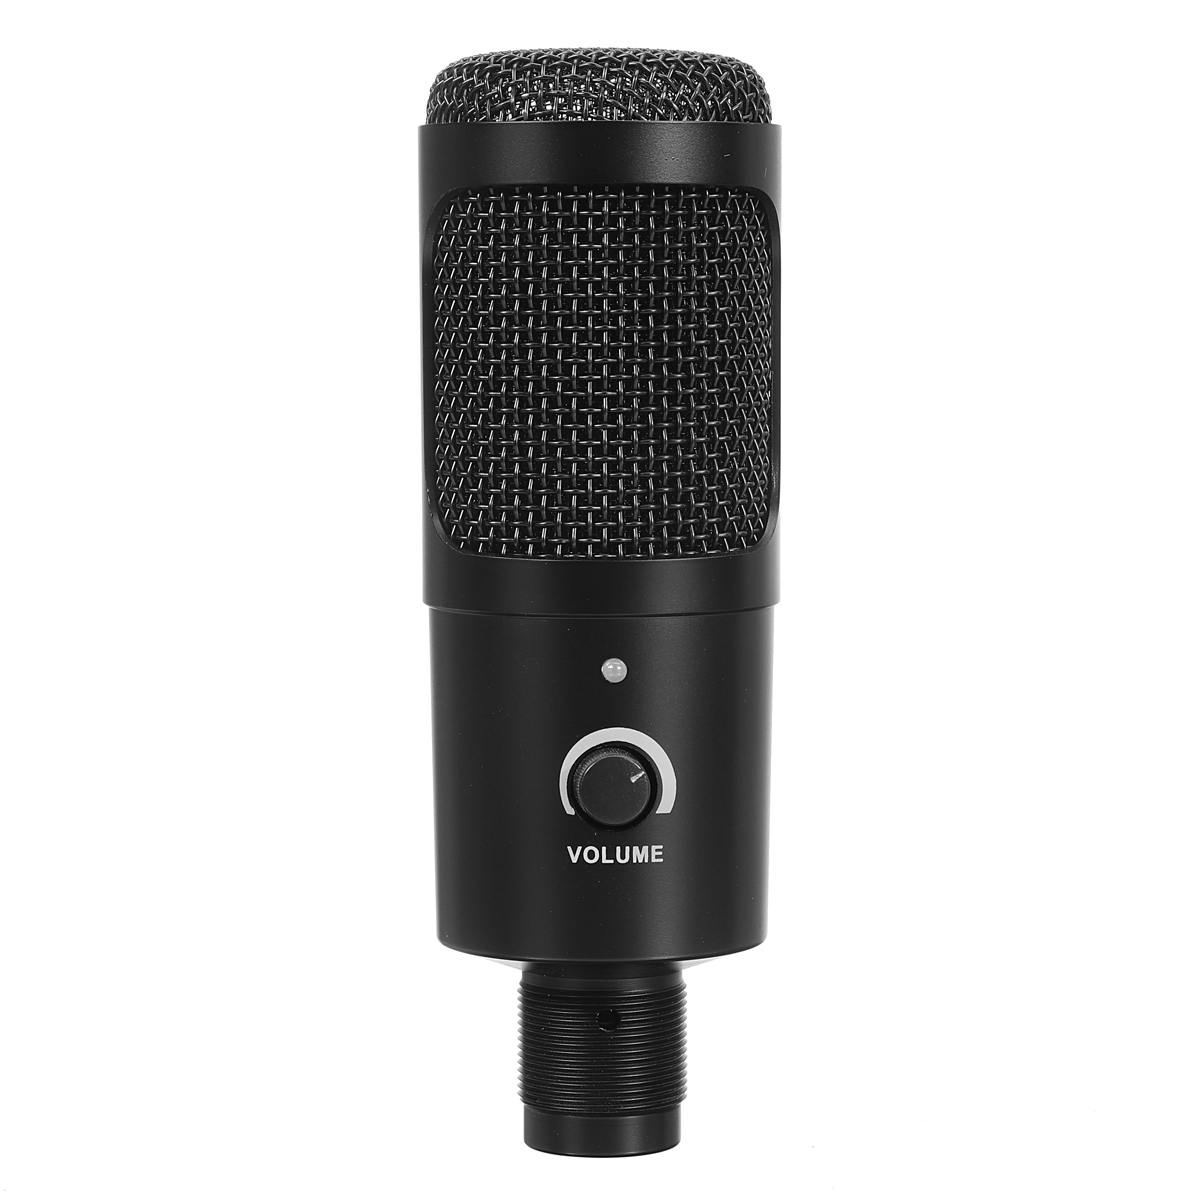 Wired-USB-Microphone-with-Tripod-for-Computer-Windows-for-Mac-PC-Live-Broadcast-Video-Conferencing-A-1866200-6